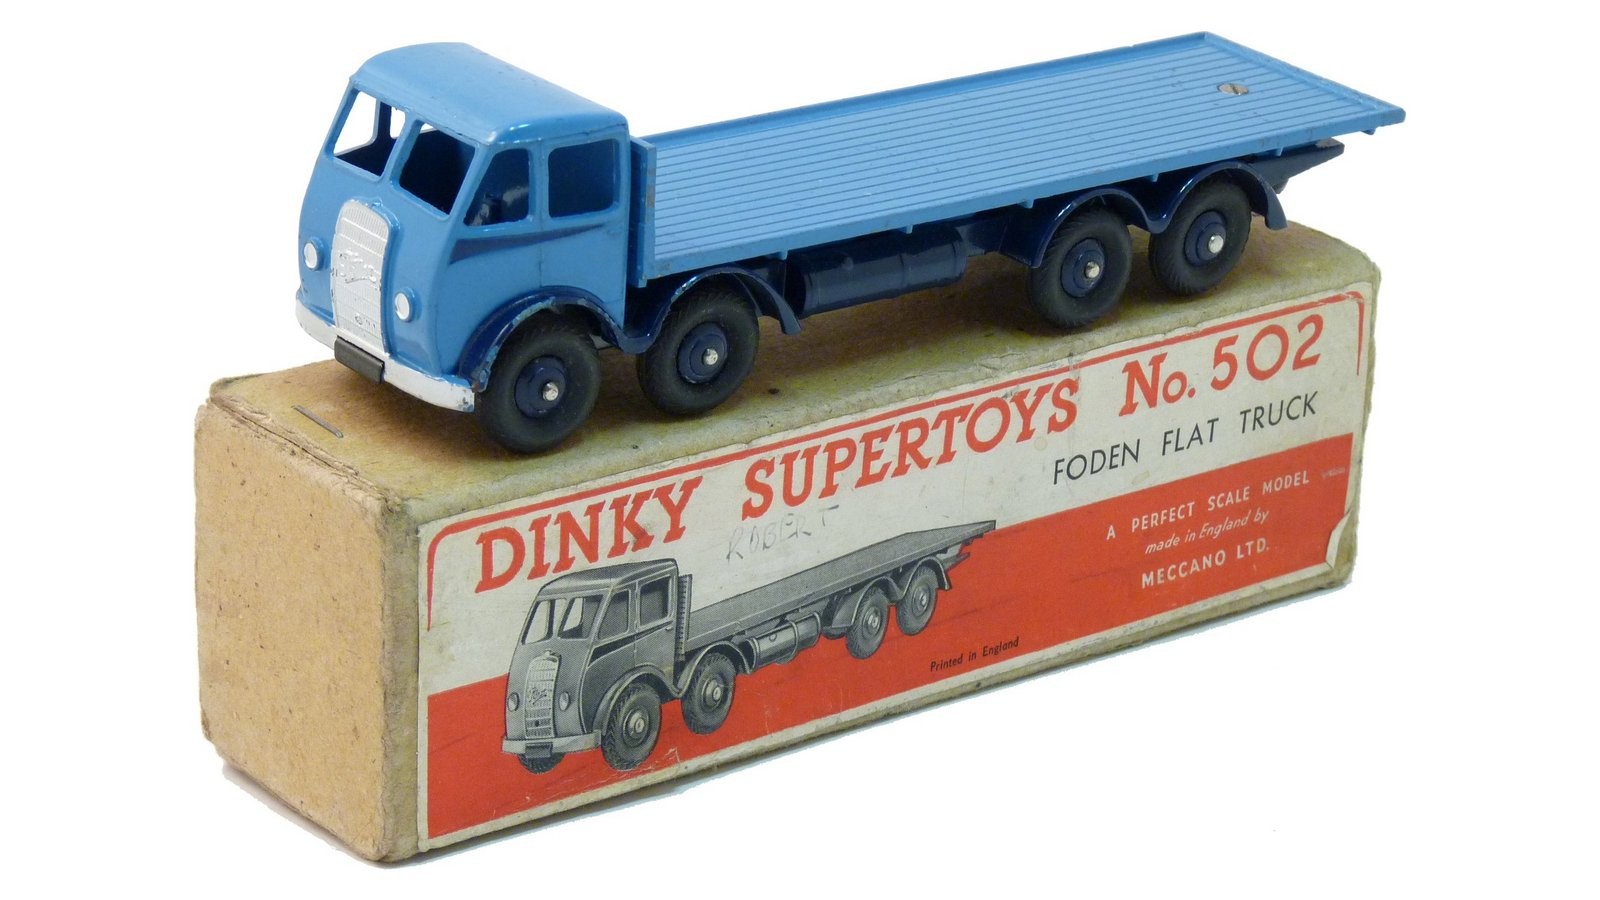 Foden Flat Truck / Dinky Toys (металл)